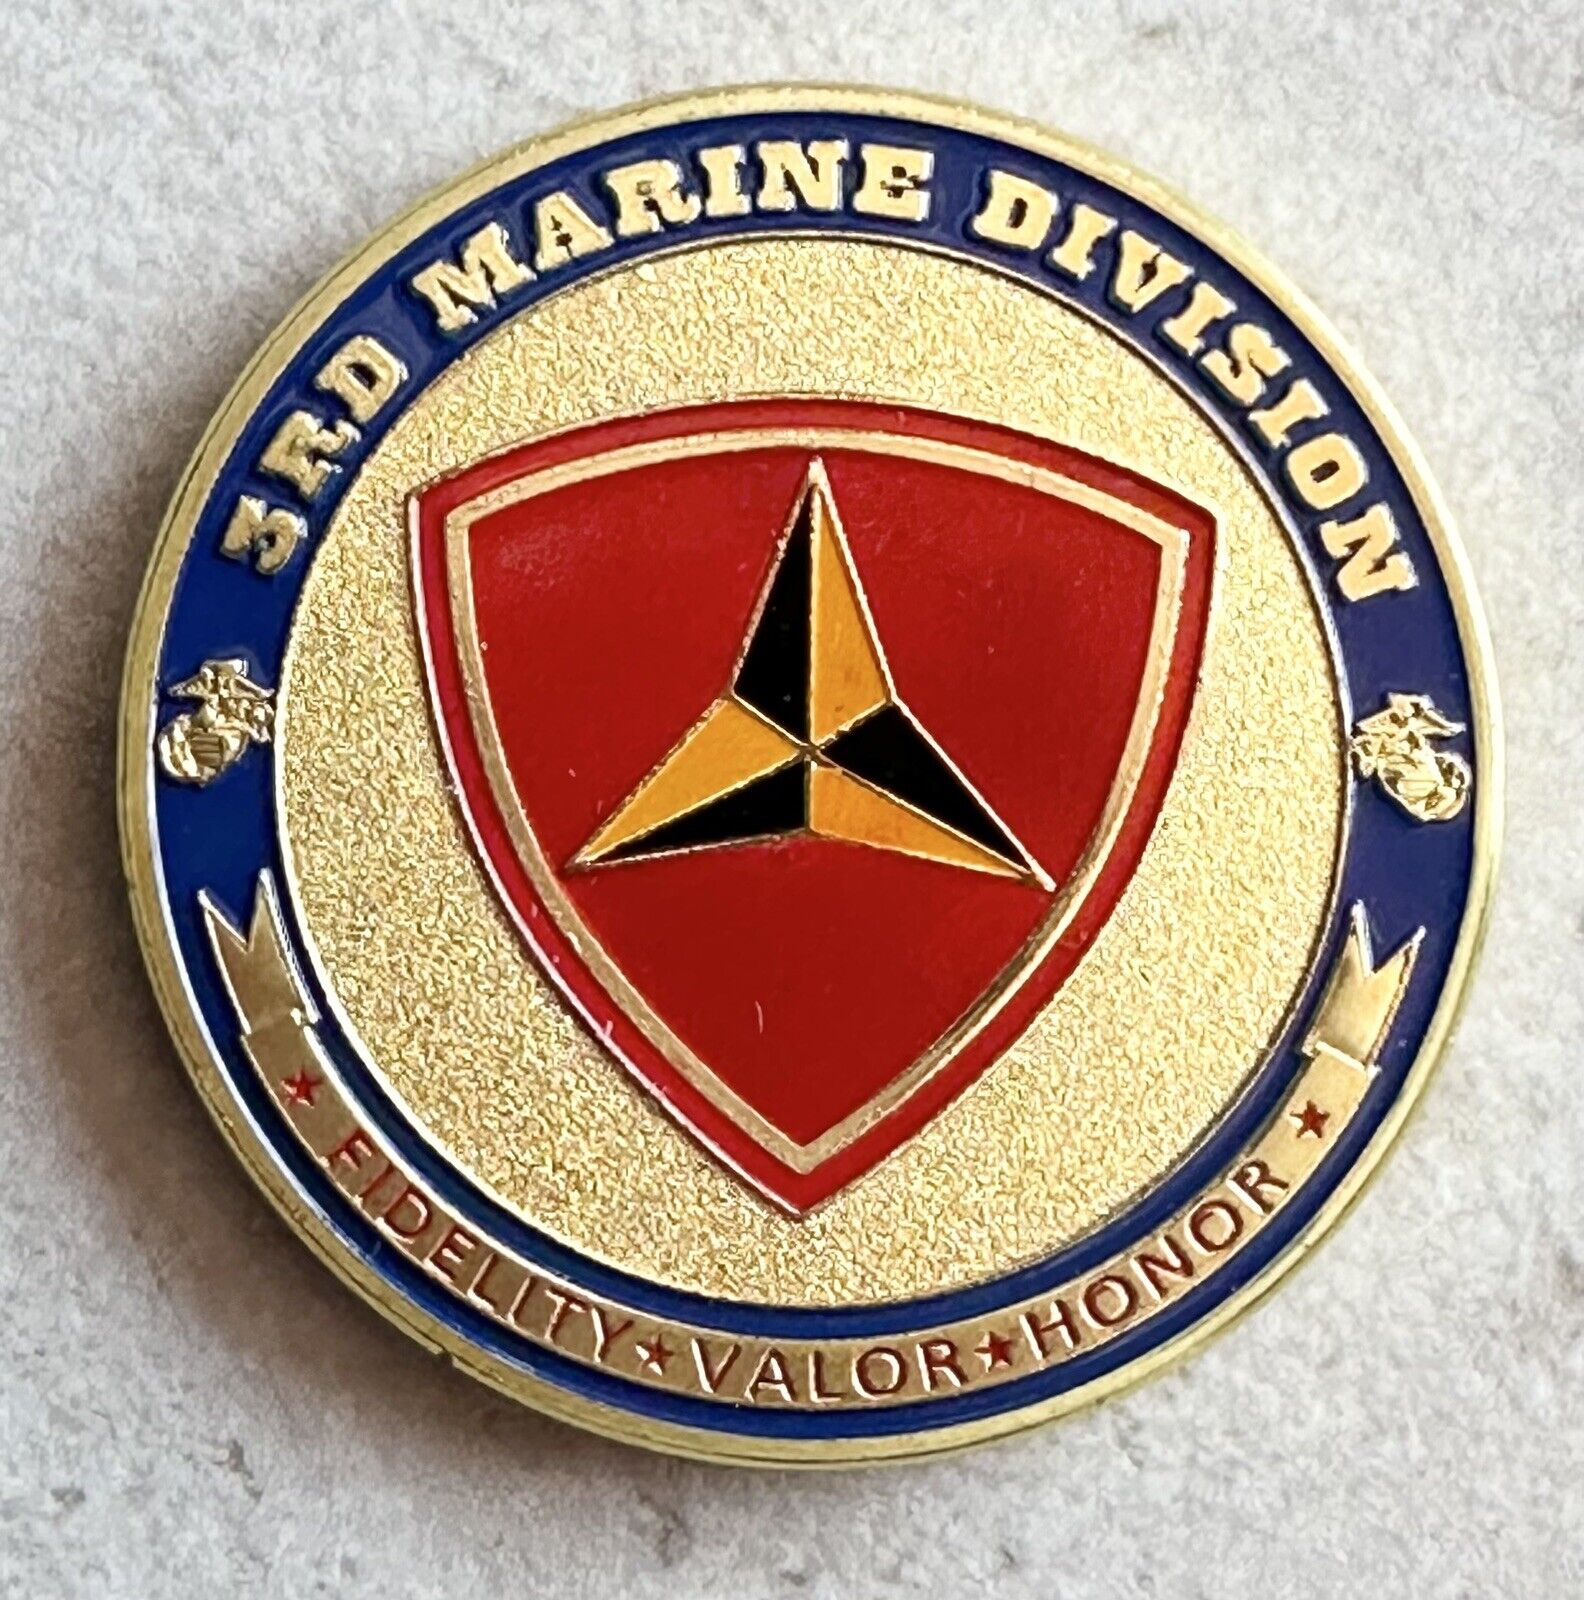 US MARINE CORPS - 3rd MARINE DIVISION Challenge Coin